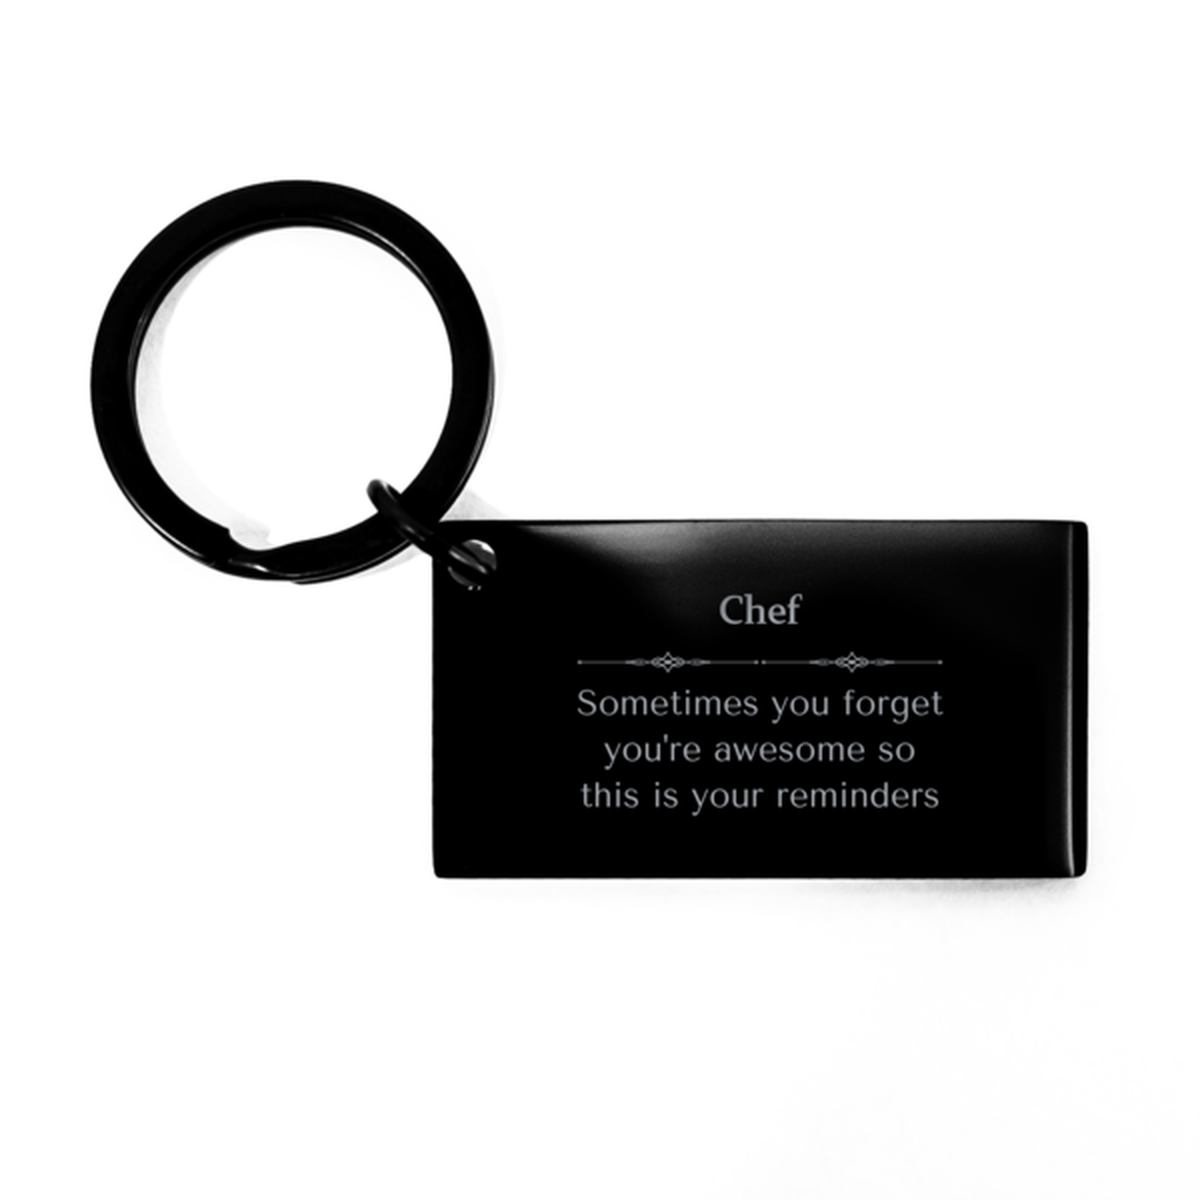 Sentimental Chef Keychain, Detective Sometimes you forget you're awesome so this is your reminders, Graduation Christmas Birthday Gifts for Chef, Men, Women, Coworkers